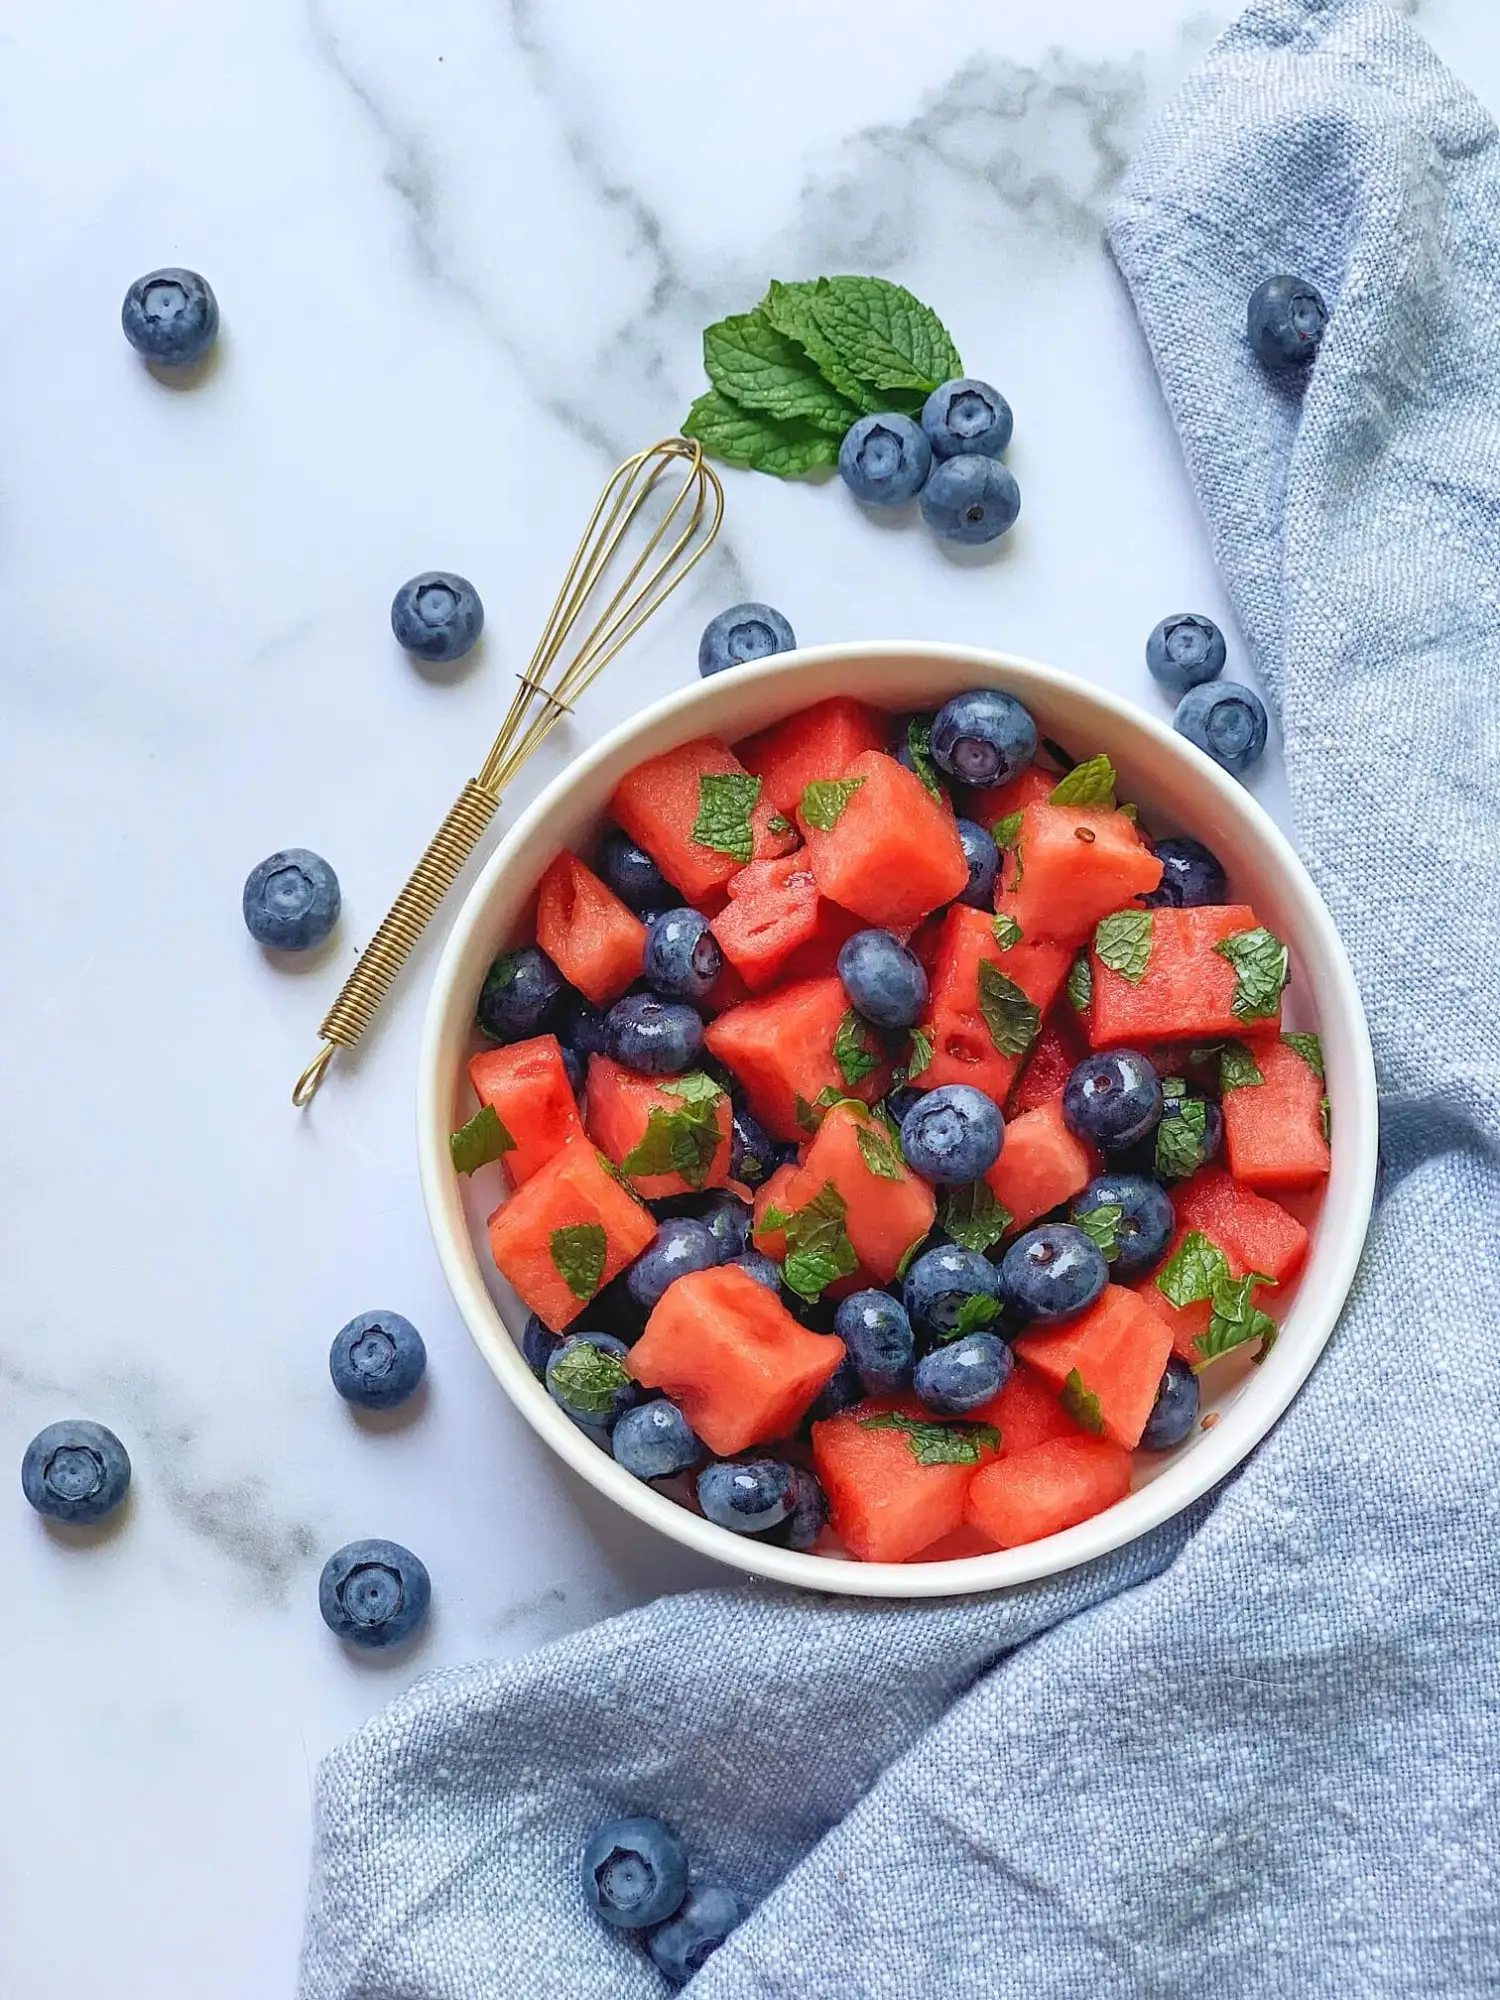 A bowl of fresh fruit surrounded fresh blueberries.